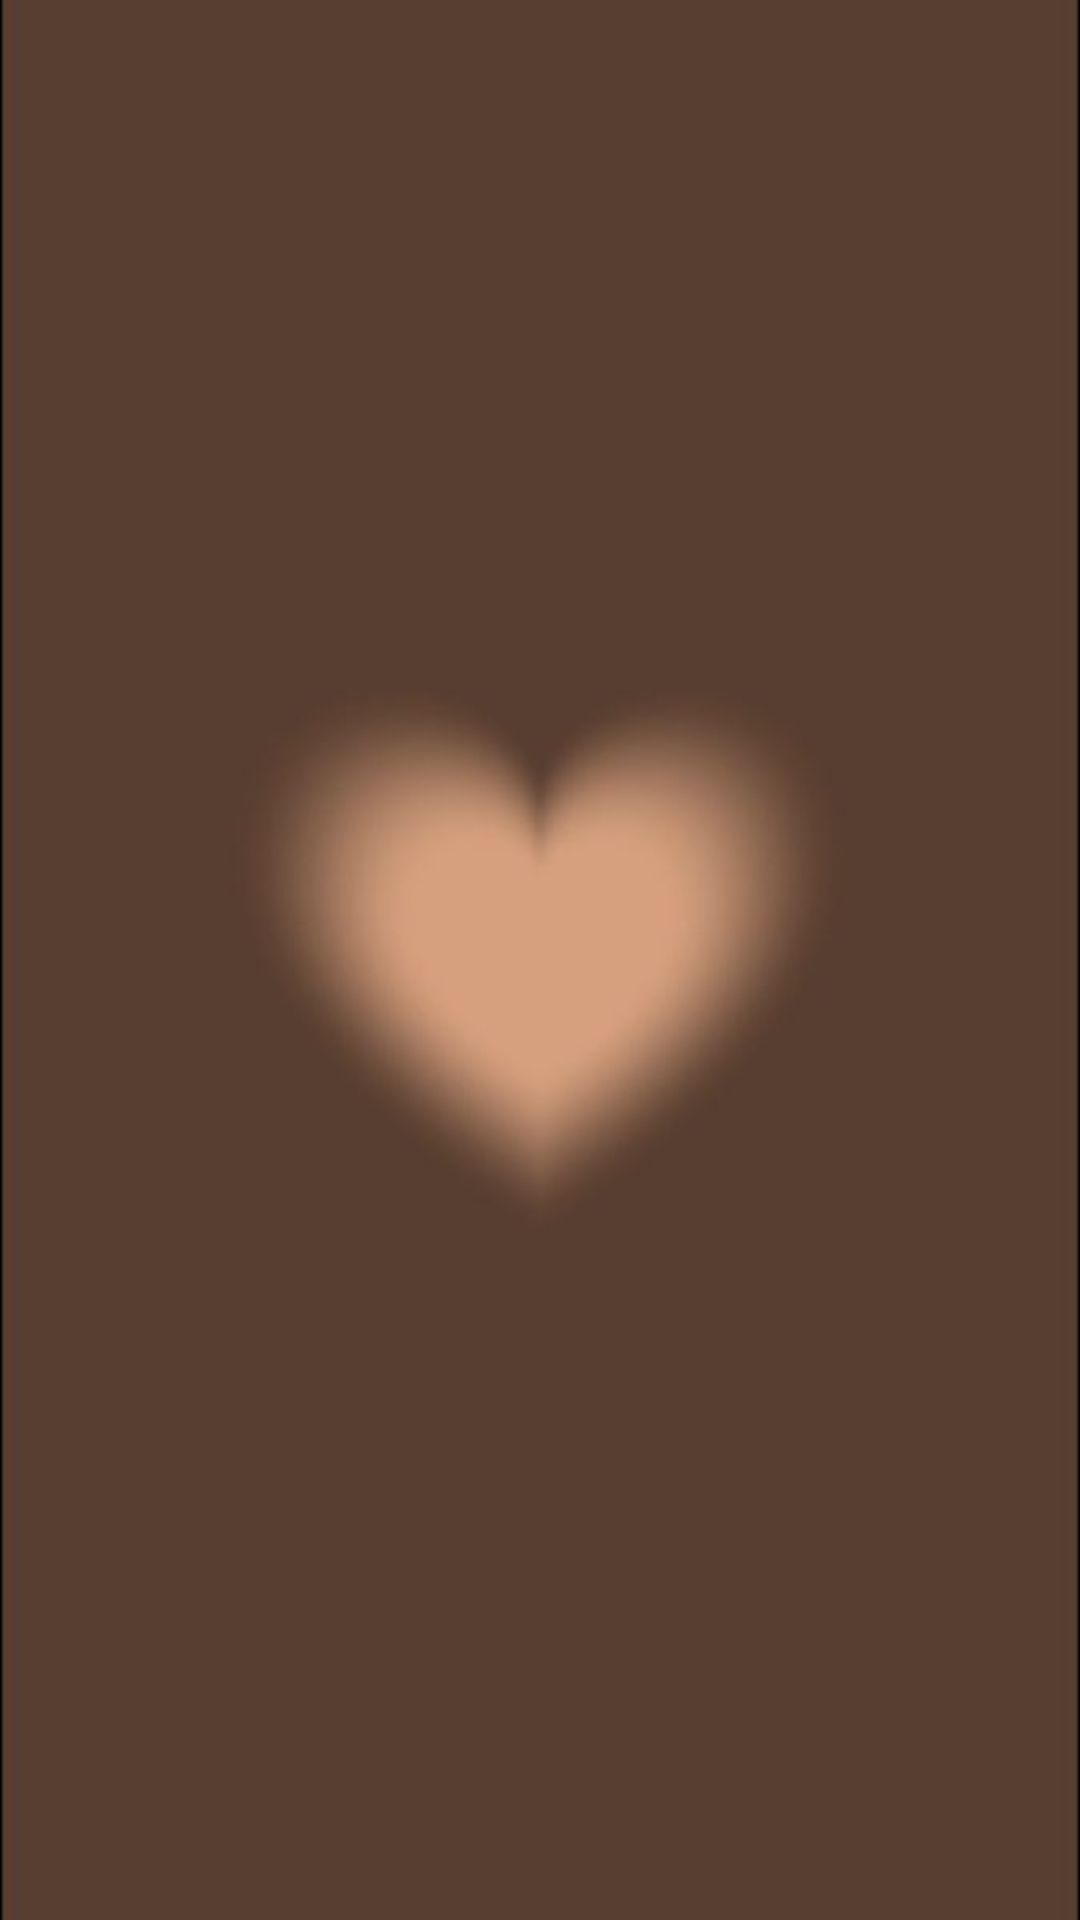 A heart shape in the middle of a brown background - Heart